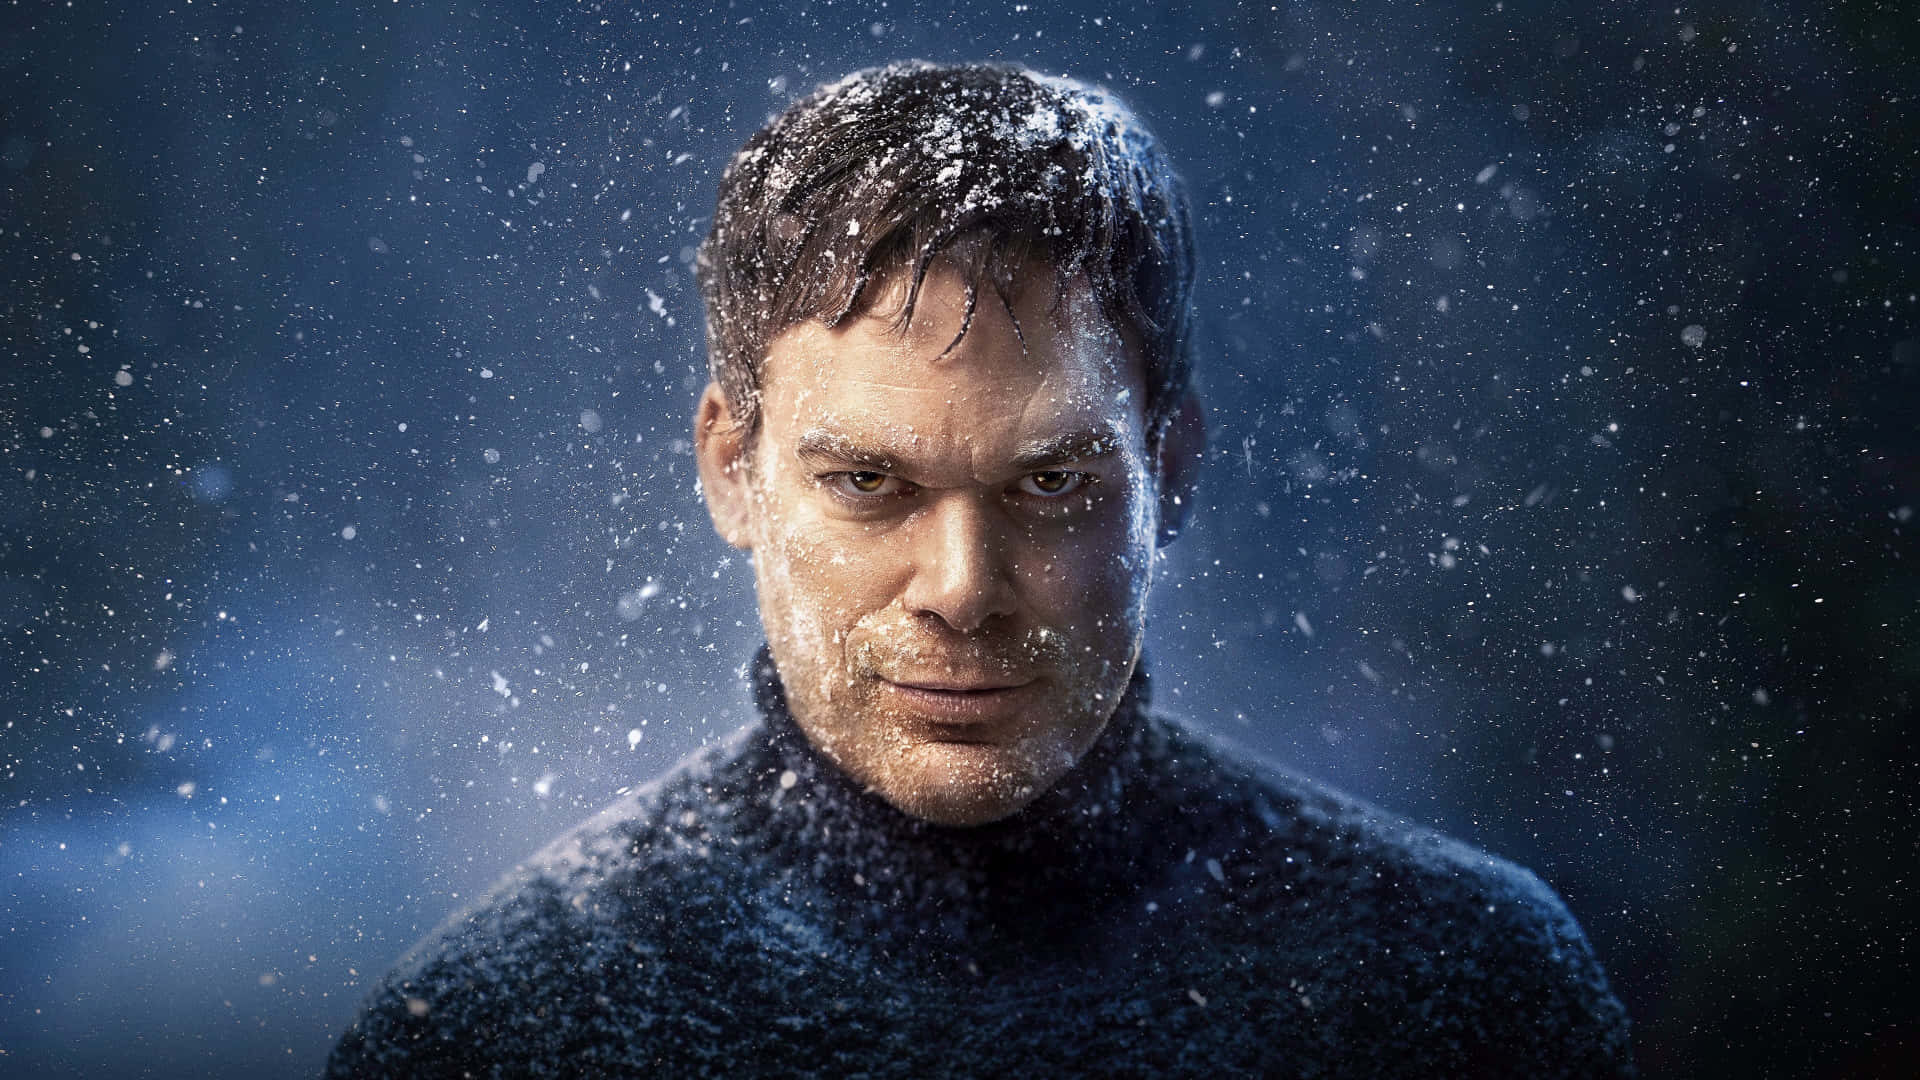 Actor Michael C. Hall Looks To The Future. Background